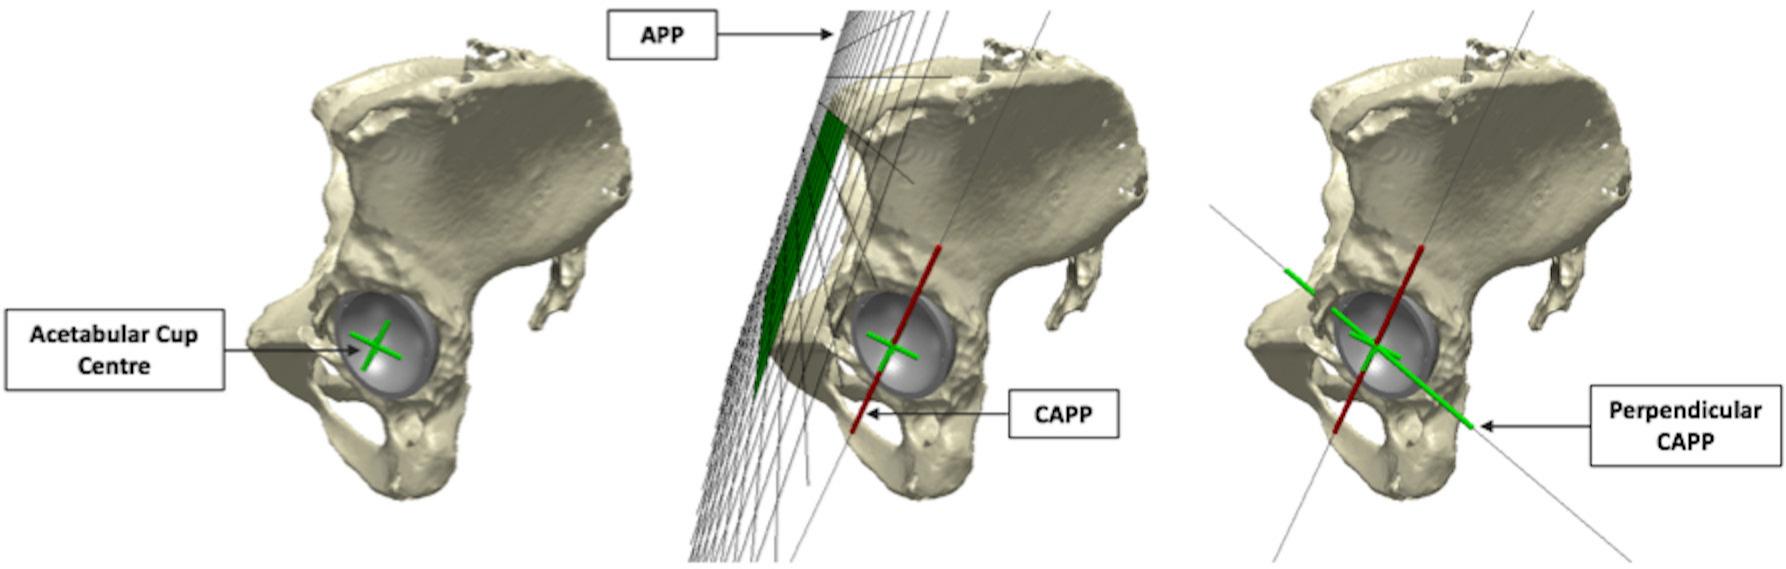 Fig. 4 
            Computational models of a pelvis and Birmingham hip replacement (BHR) implant, generated within Simpleware ScanIP. The "For Review Only" standardized reference system defined to measure the in vivo location of edge-wear is illustrated (Cup-APP (CAPP)), which is parallel to the anterior pelvic plane (APP) and intersects the centre of the cup opening.
          